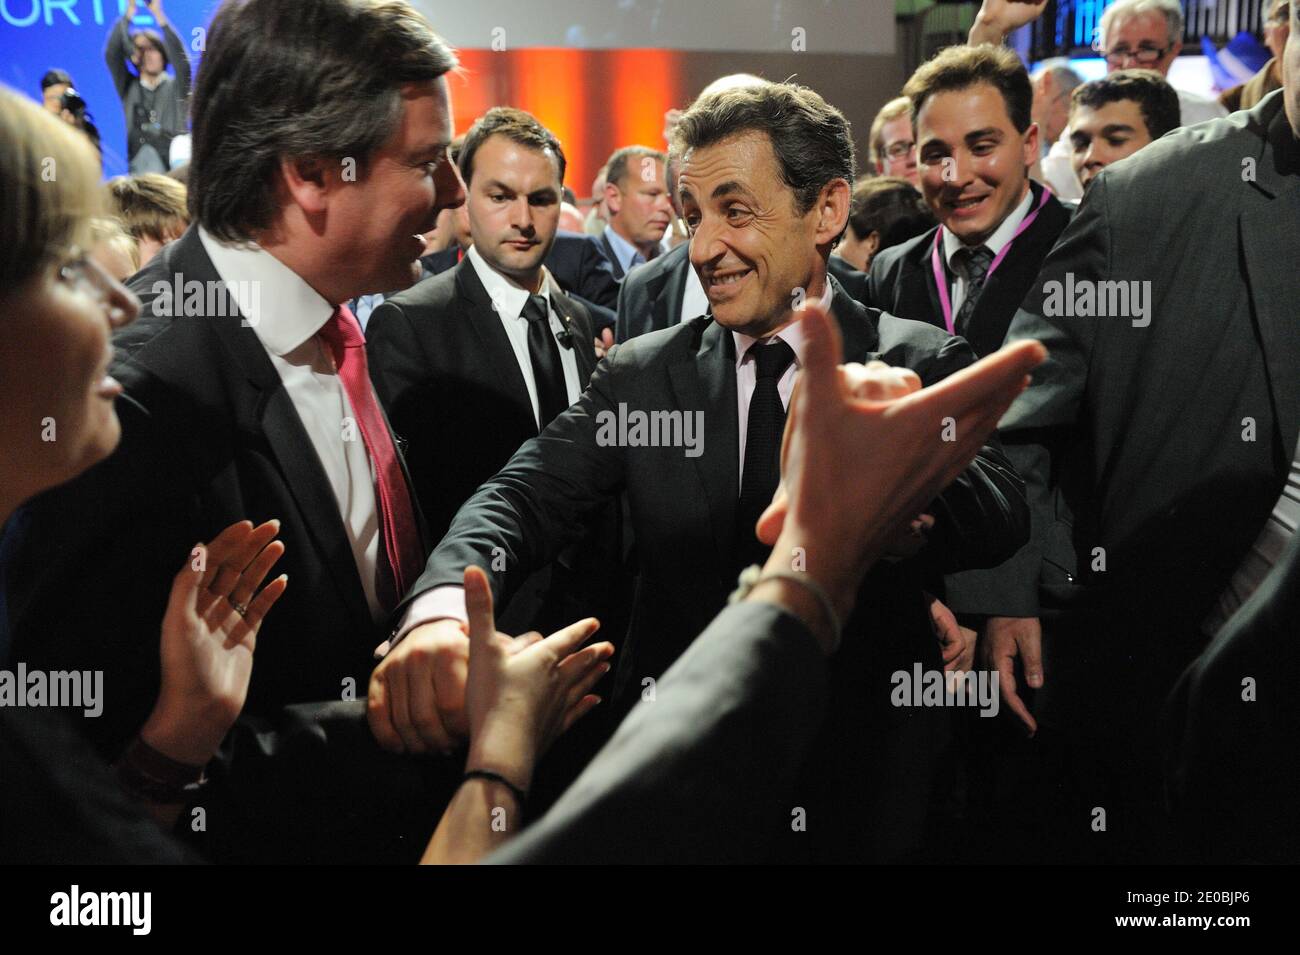 French incumbent President and UMP ruling candidate for 2012 presidential election Nicolas Sarkozy is pictured during a campaign meeting in Elancourt, France on March 28, 2012. Photo by Jacques Witt/Pool/ABACAPRESS.COM Stock Photo